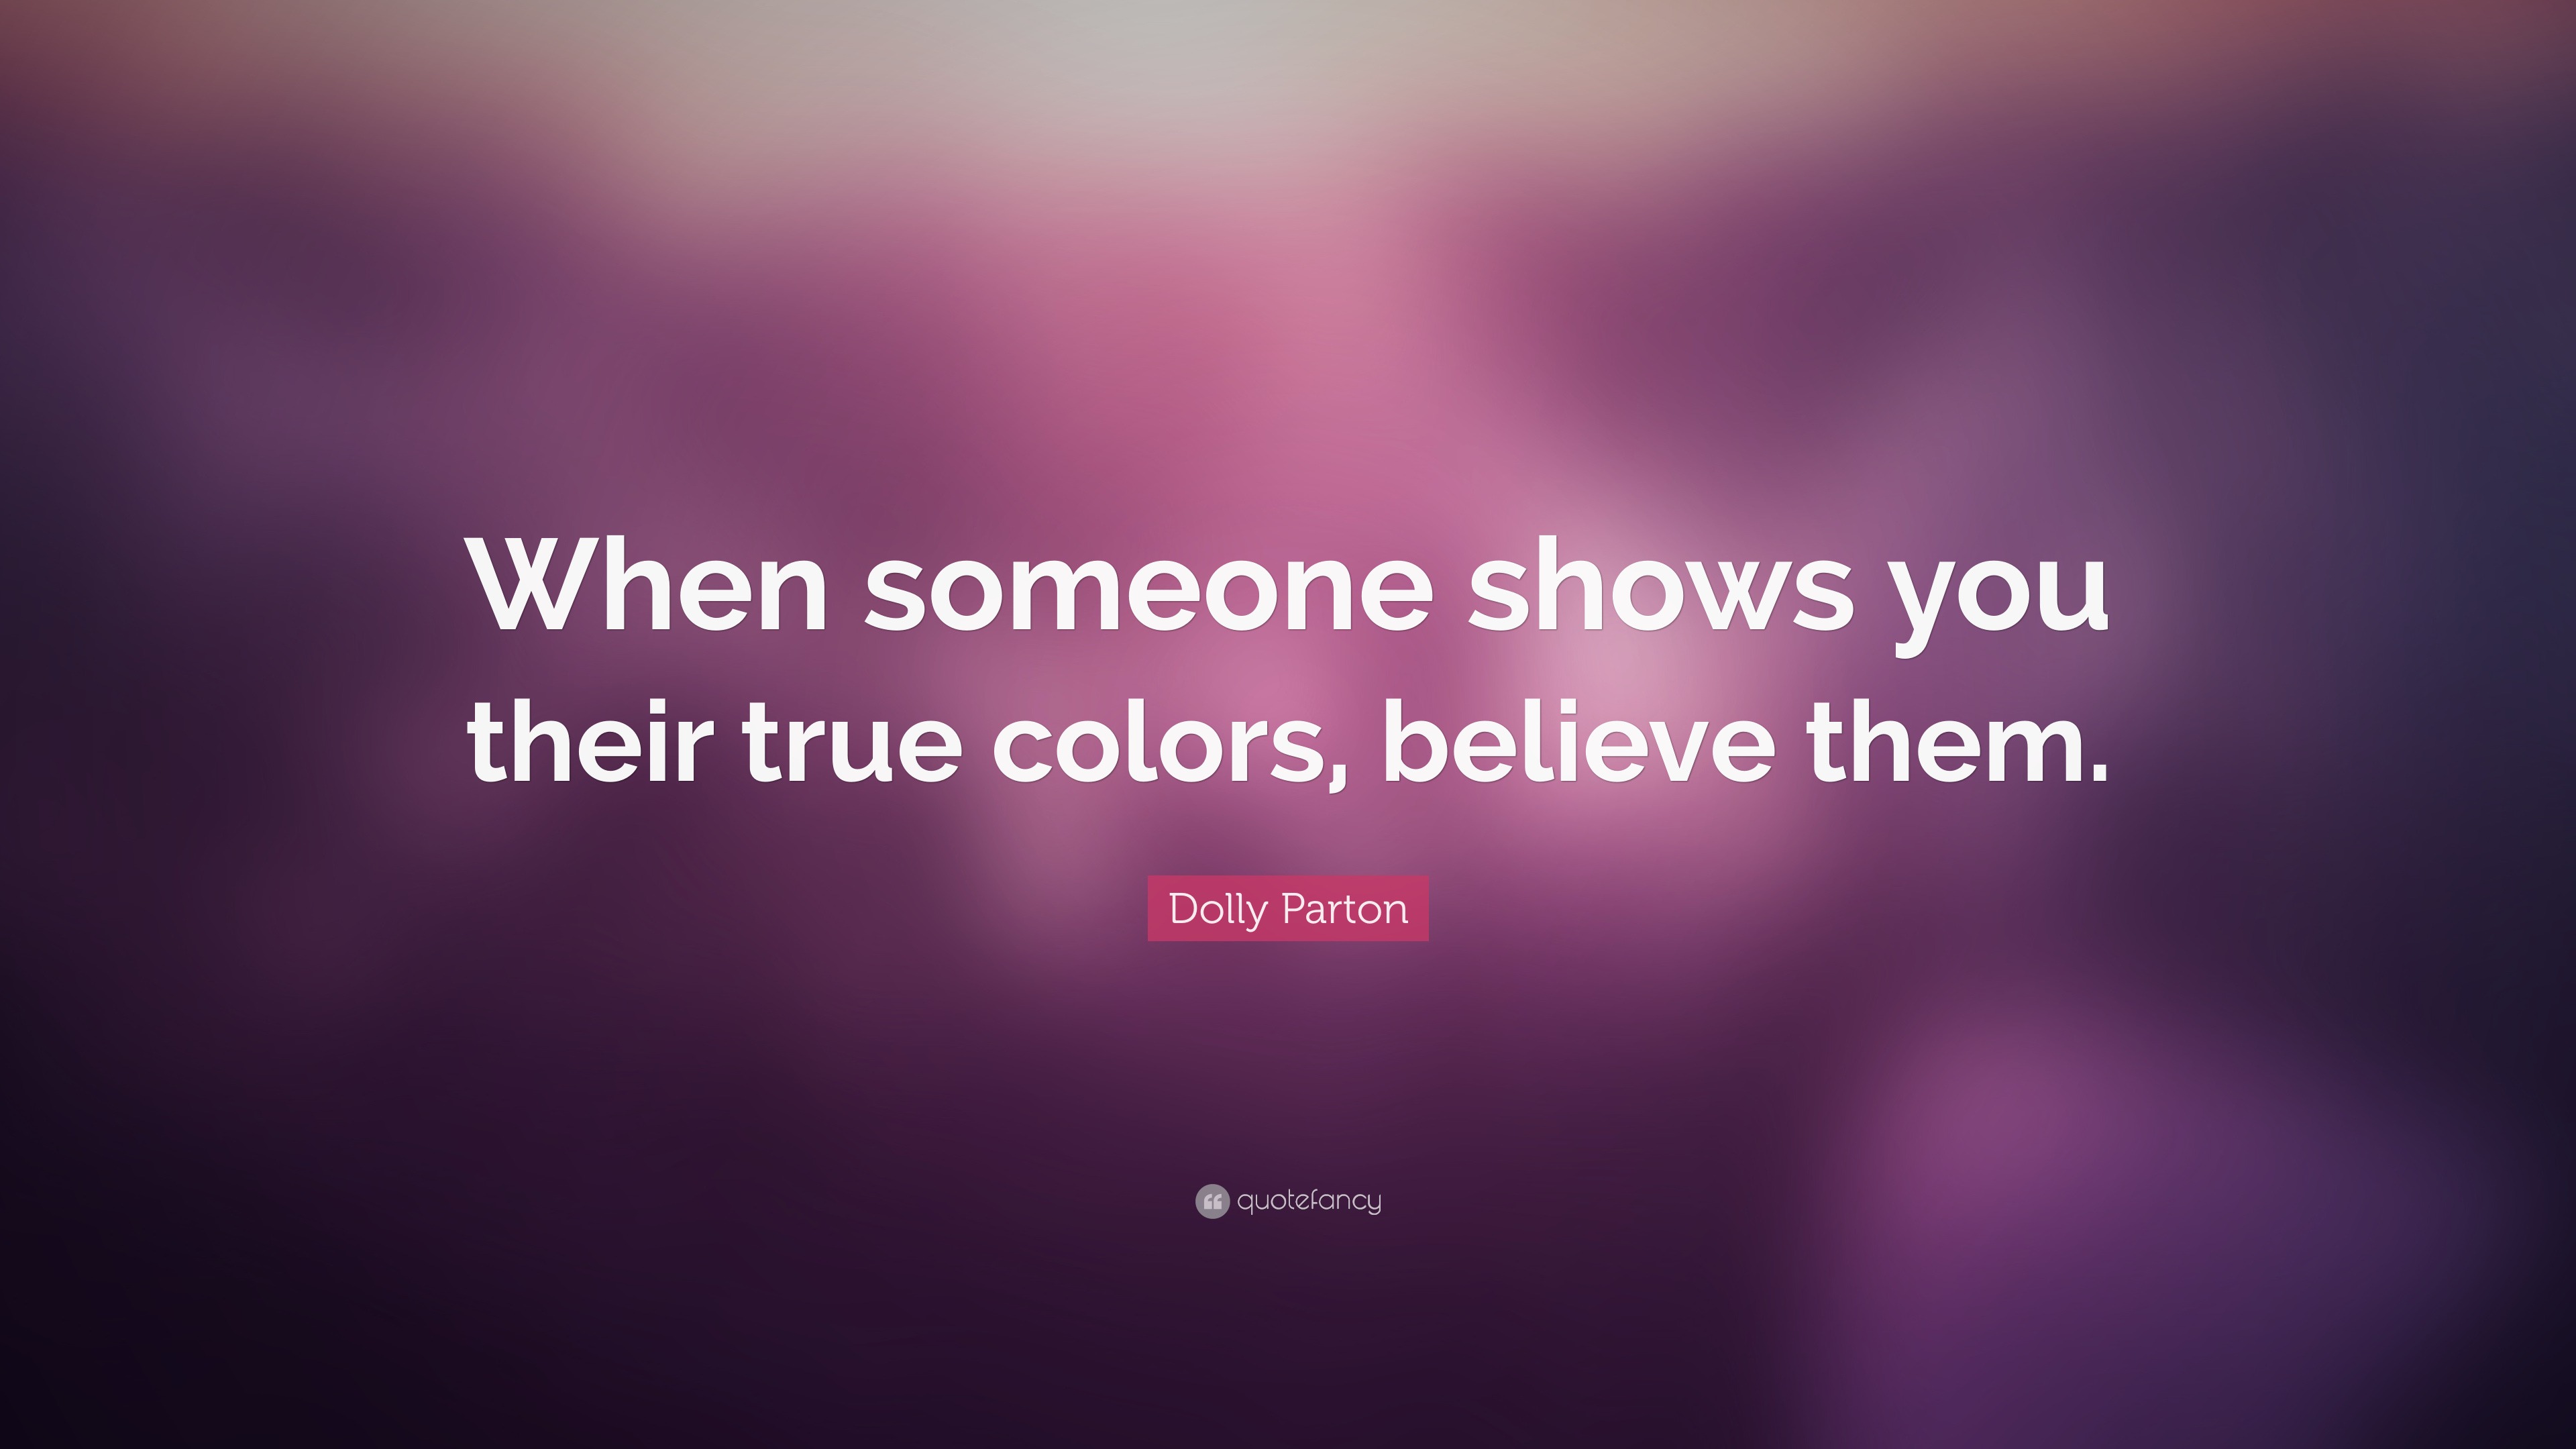 Dolly Parton Quote: “When someone shows you their true colors, believe